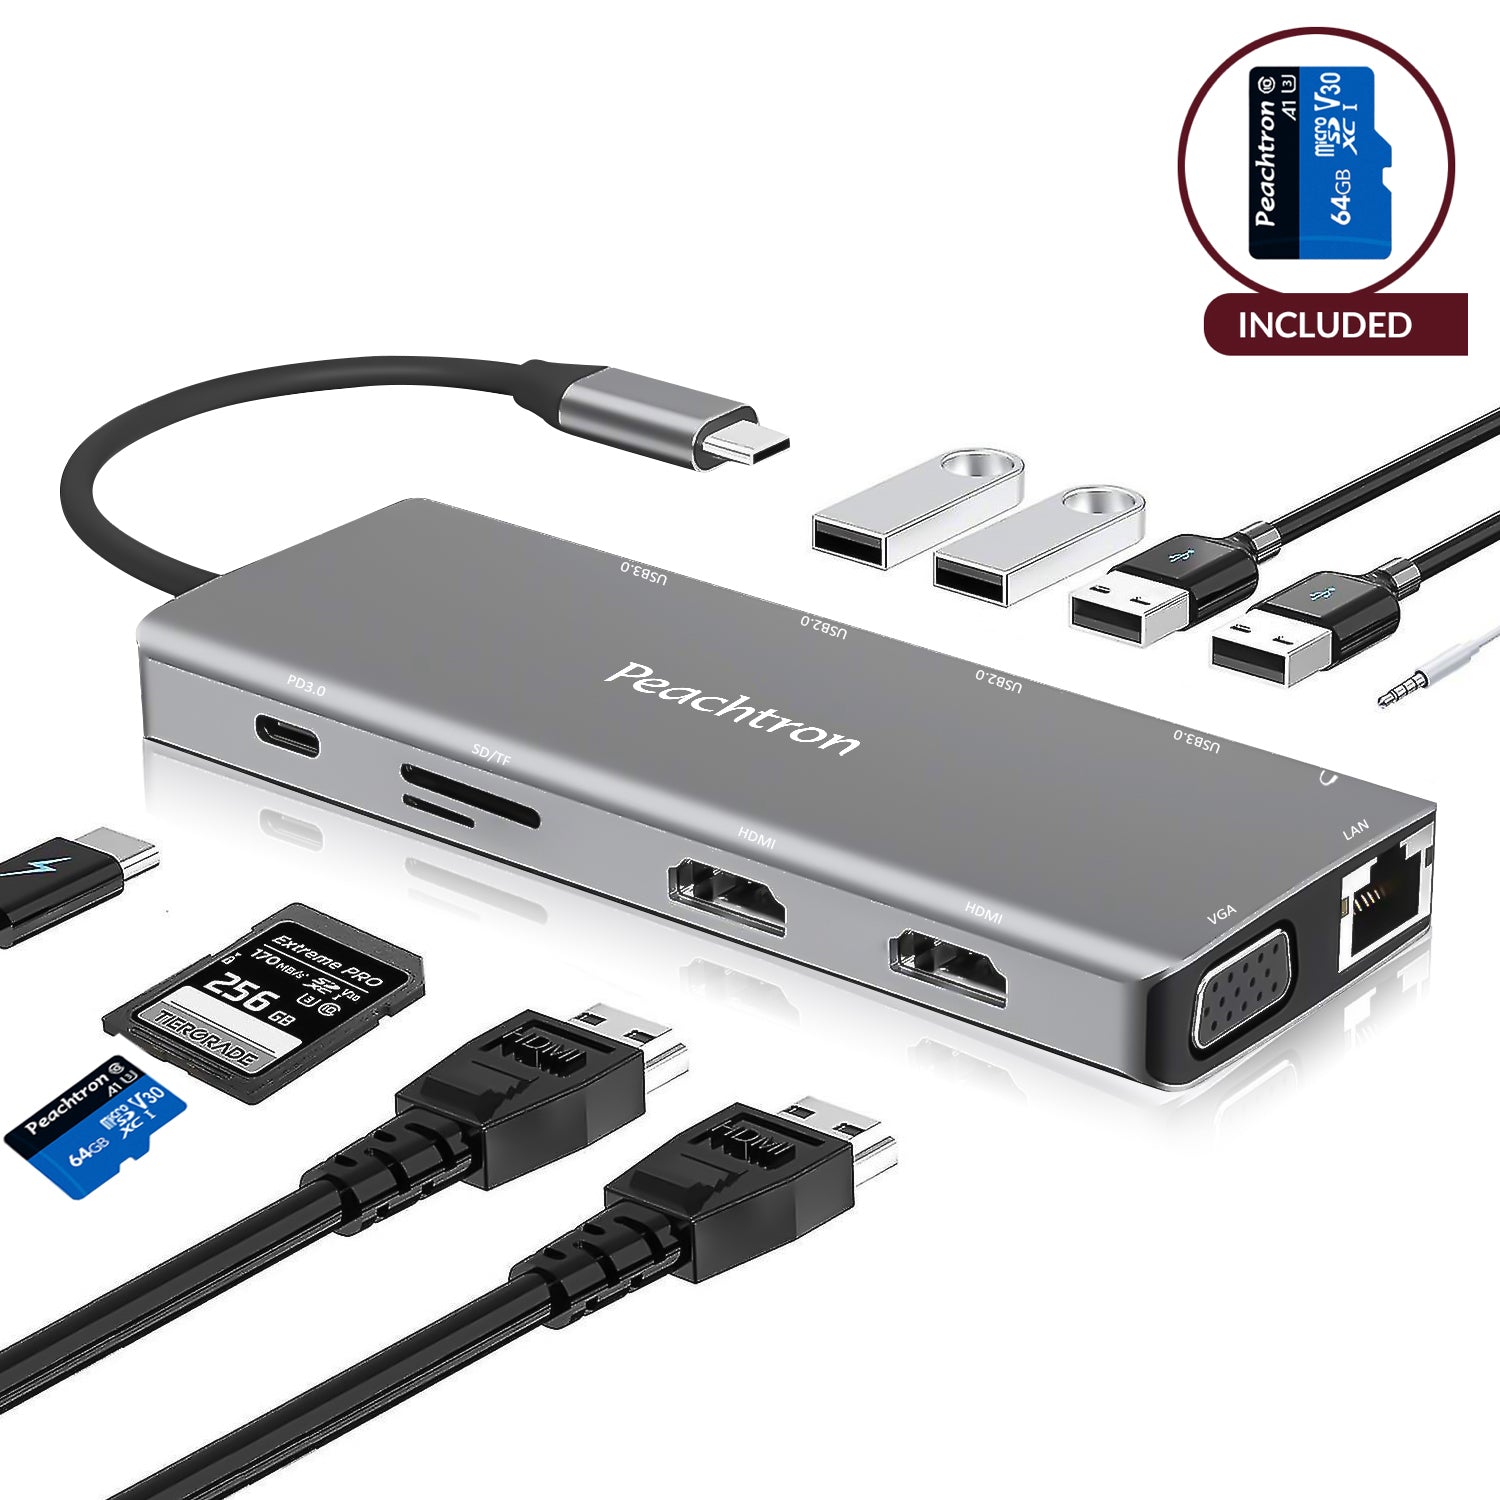 PEACHTRON USB C Docking Station 12-in-1 Hub For MacBook and Windows